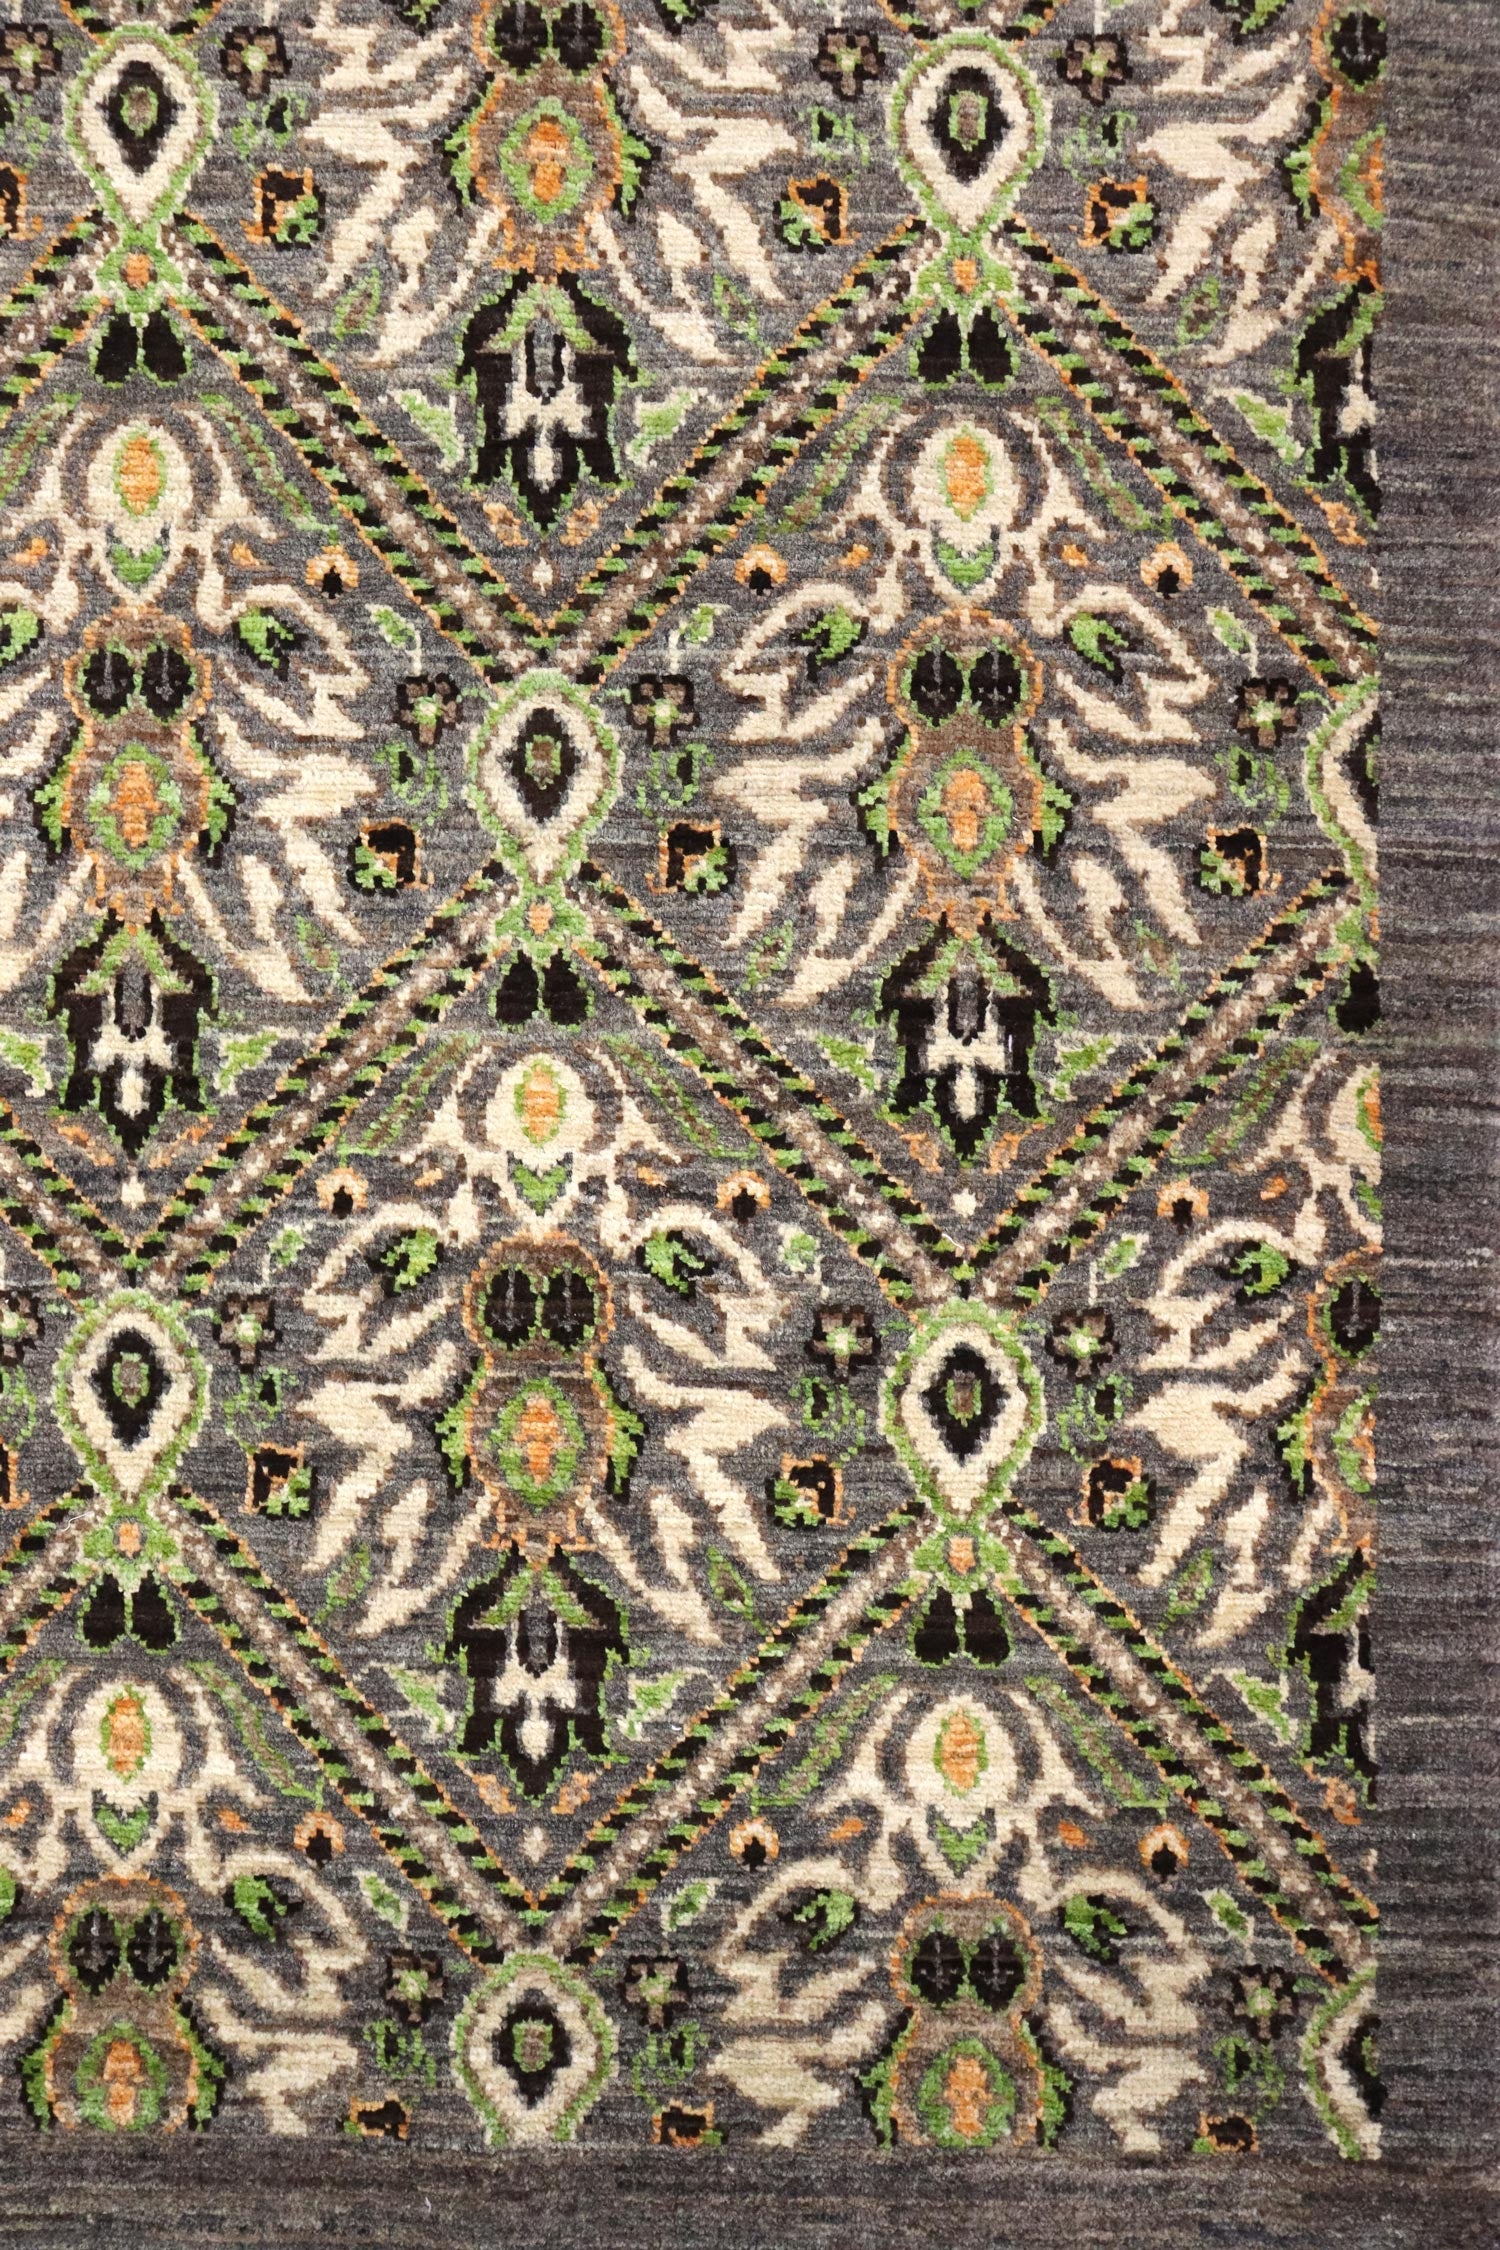 Middle Ages Handwoven Transitional Rug, J67143